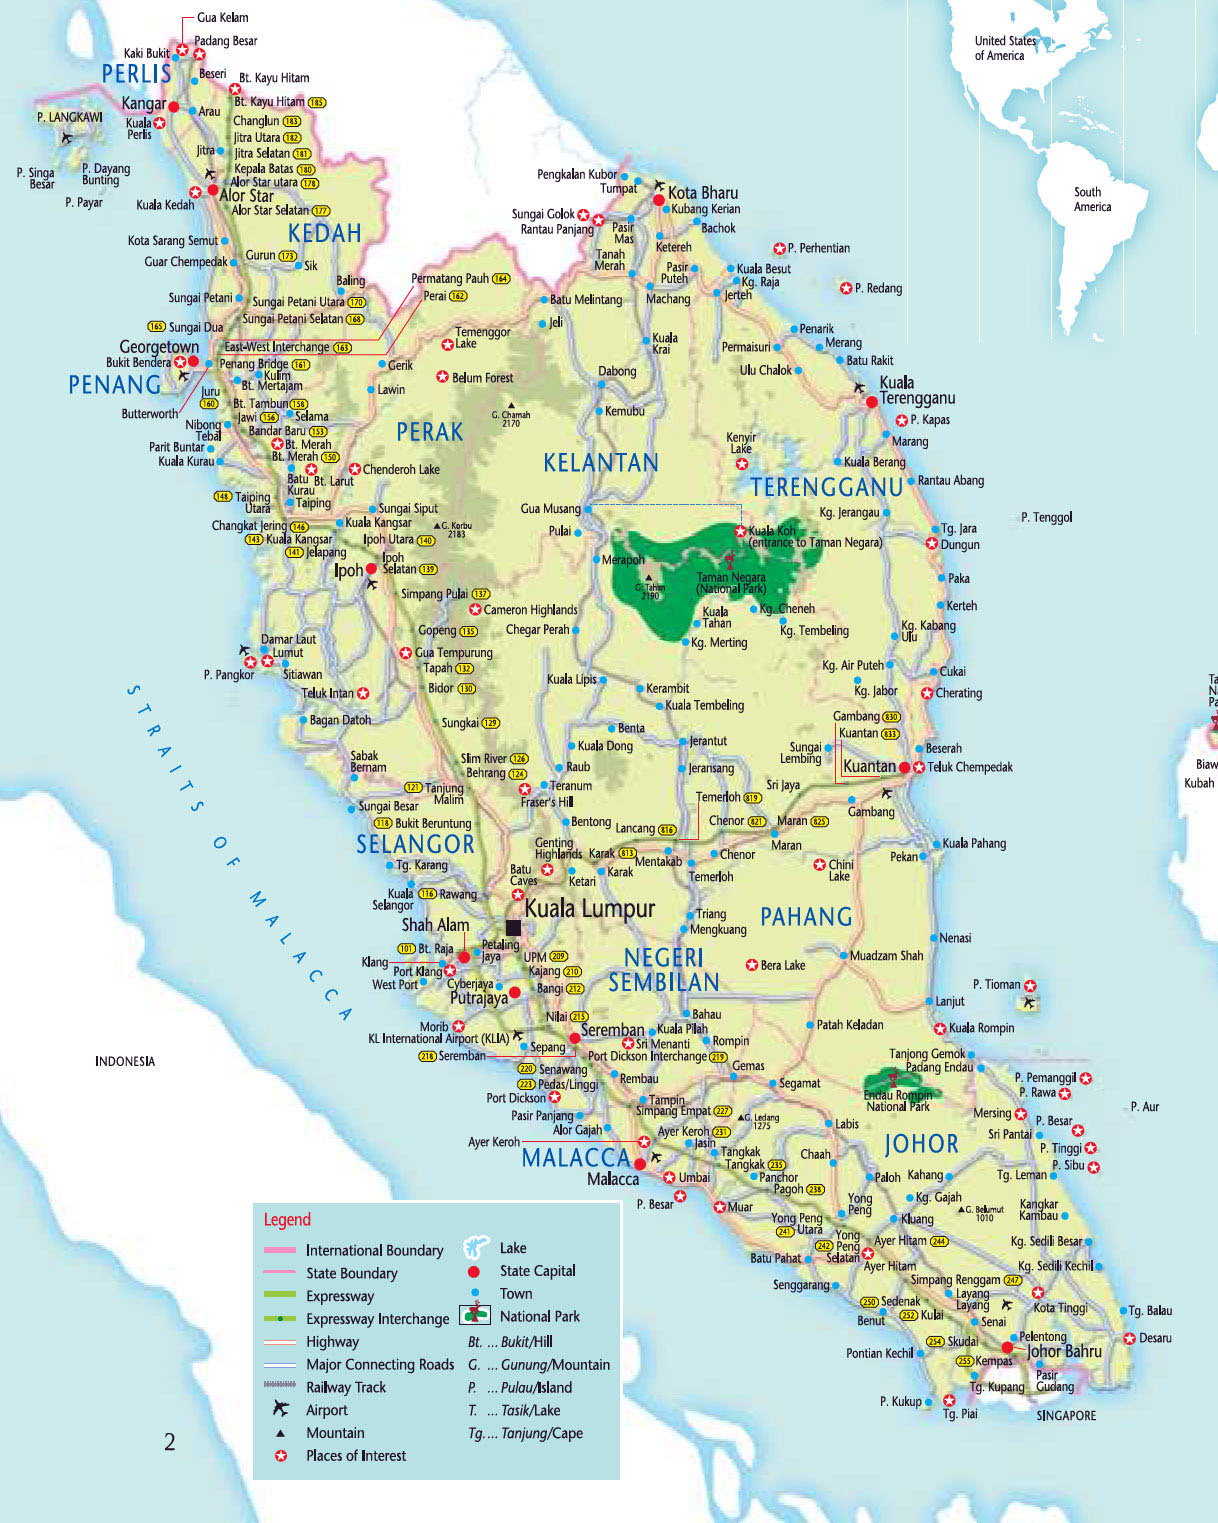 Maps of Malaysia | Detailed map of Malaysia in English | Tourist map of